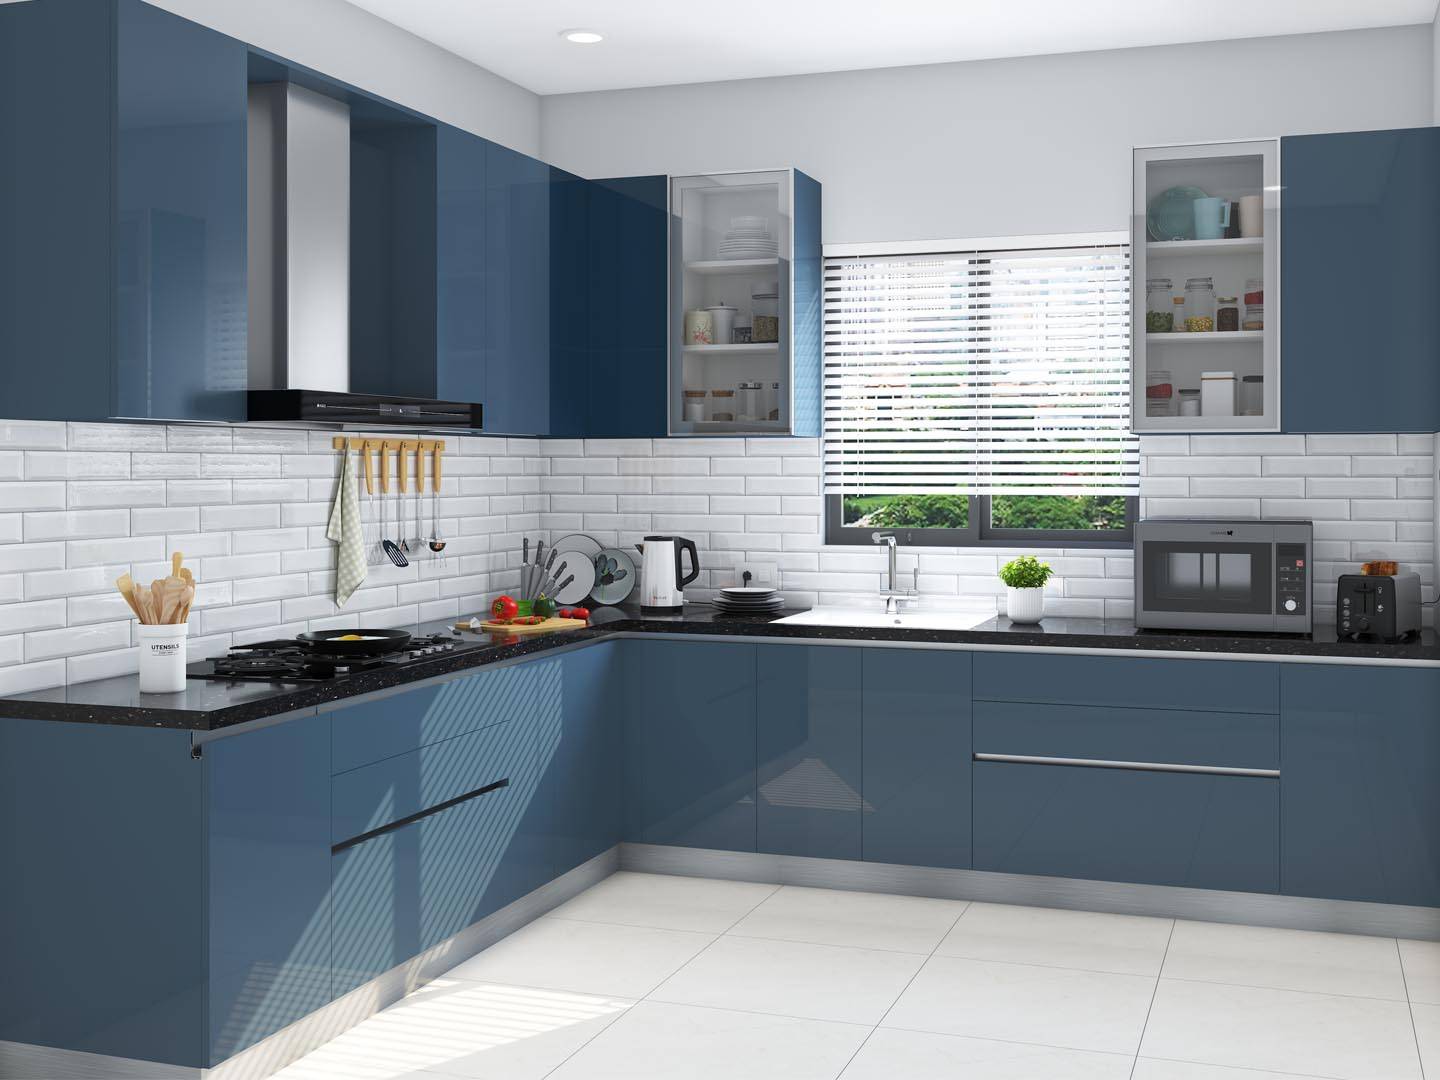 Style Inspiration What to Know When Designing a Modular Kitchen